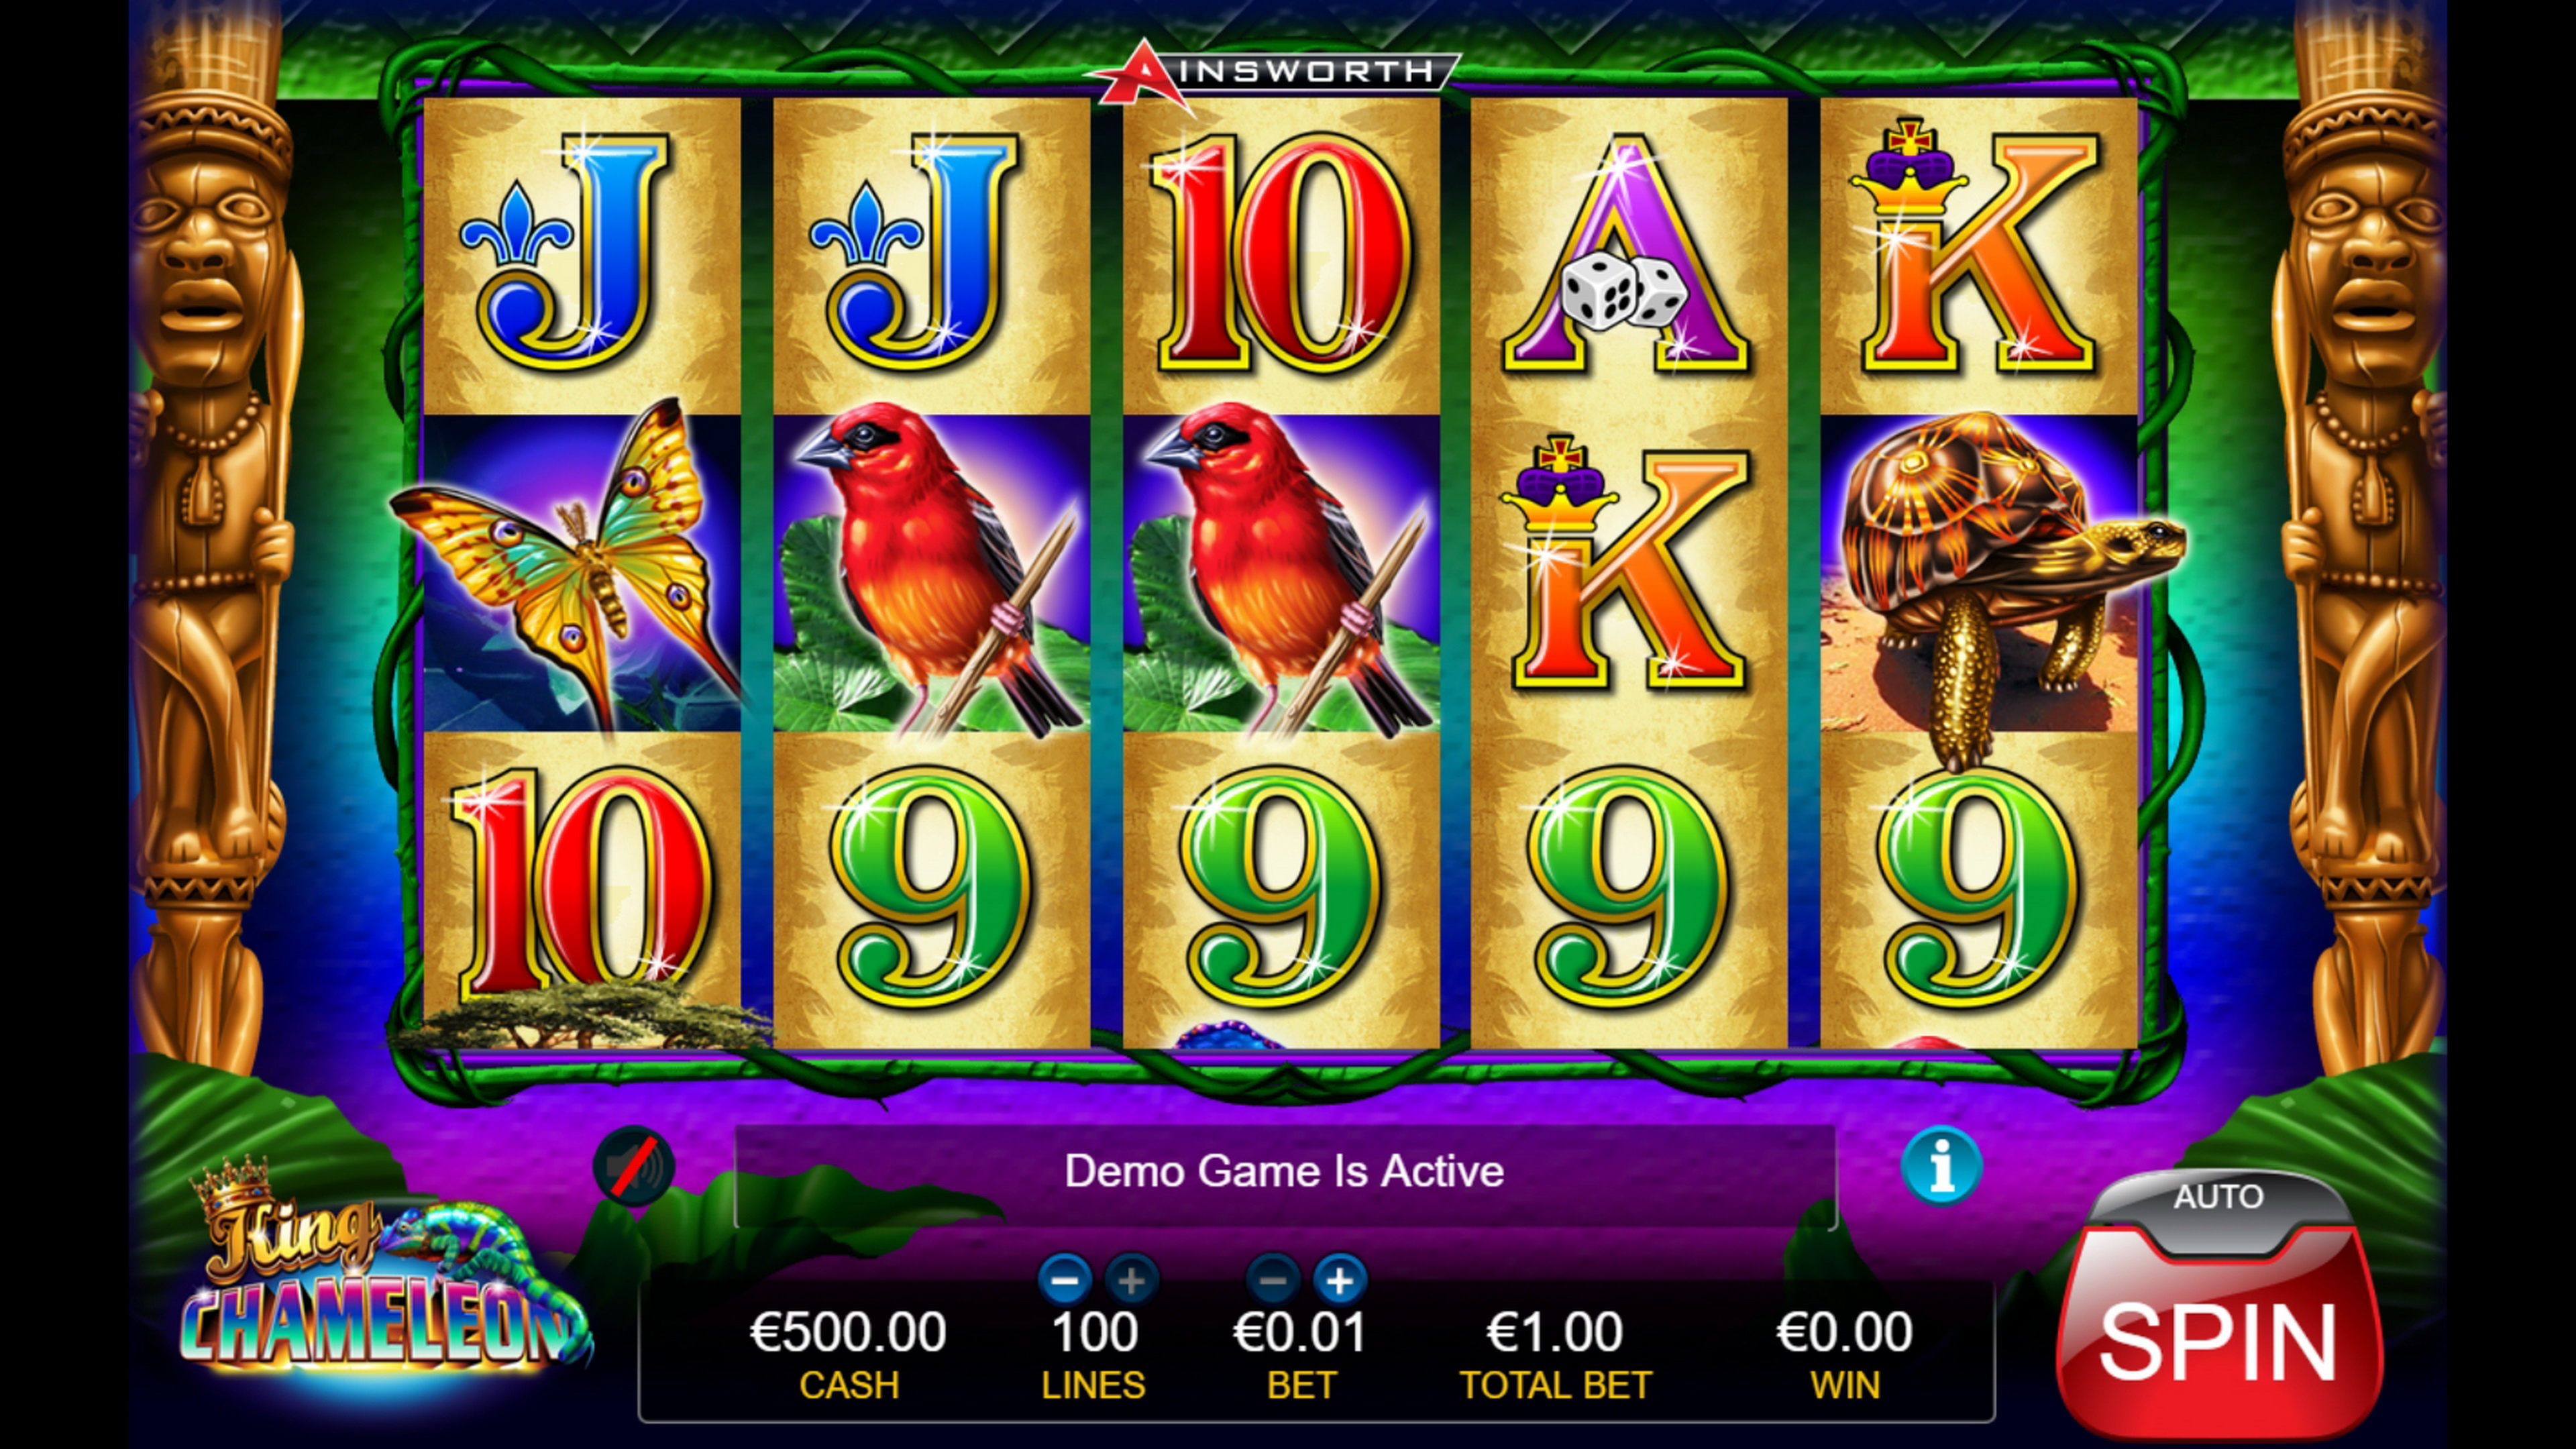 Reels in King Chameleon Slot Game by Ainsworth Gaming Technology